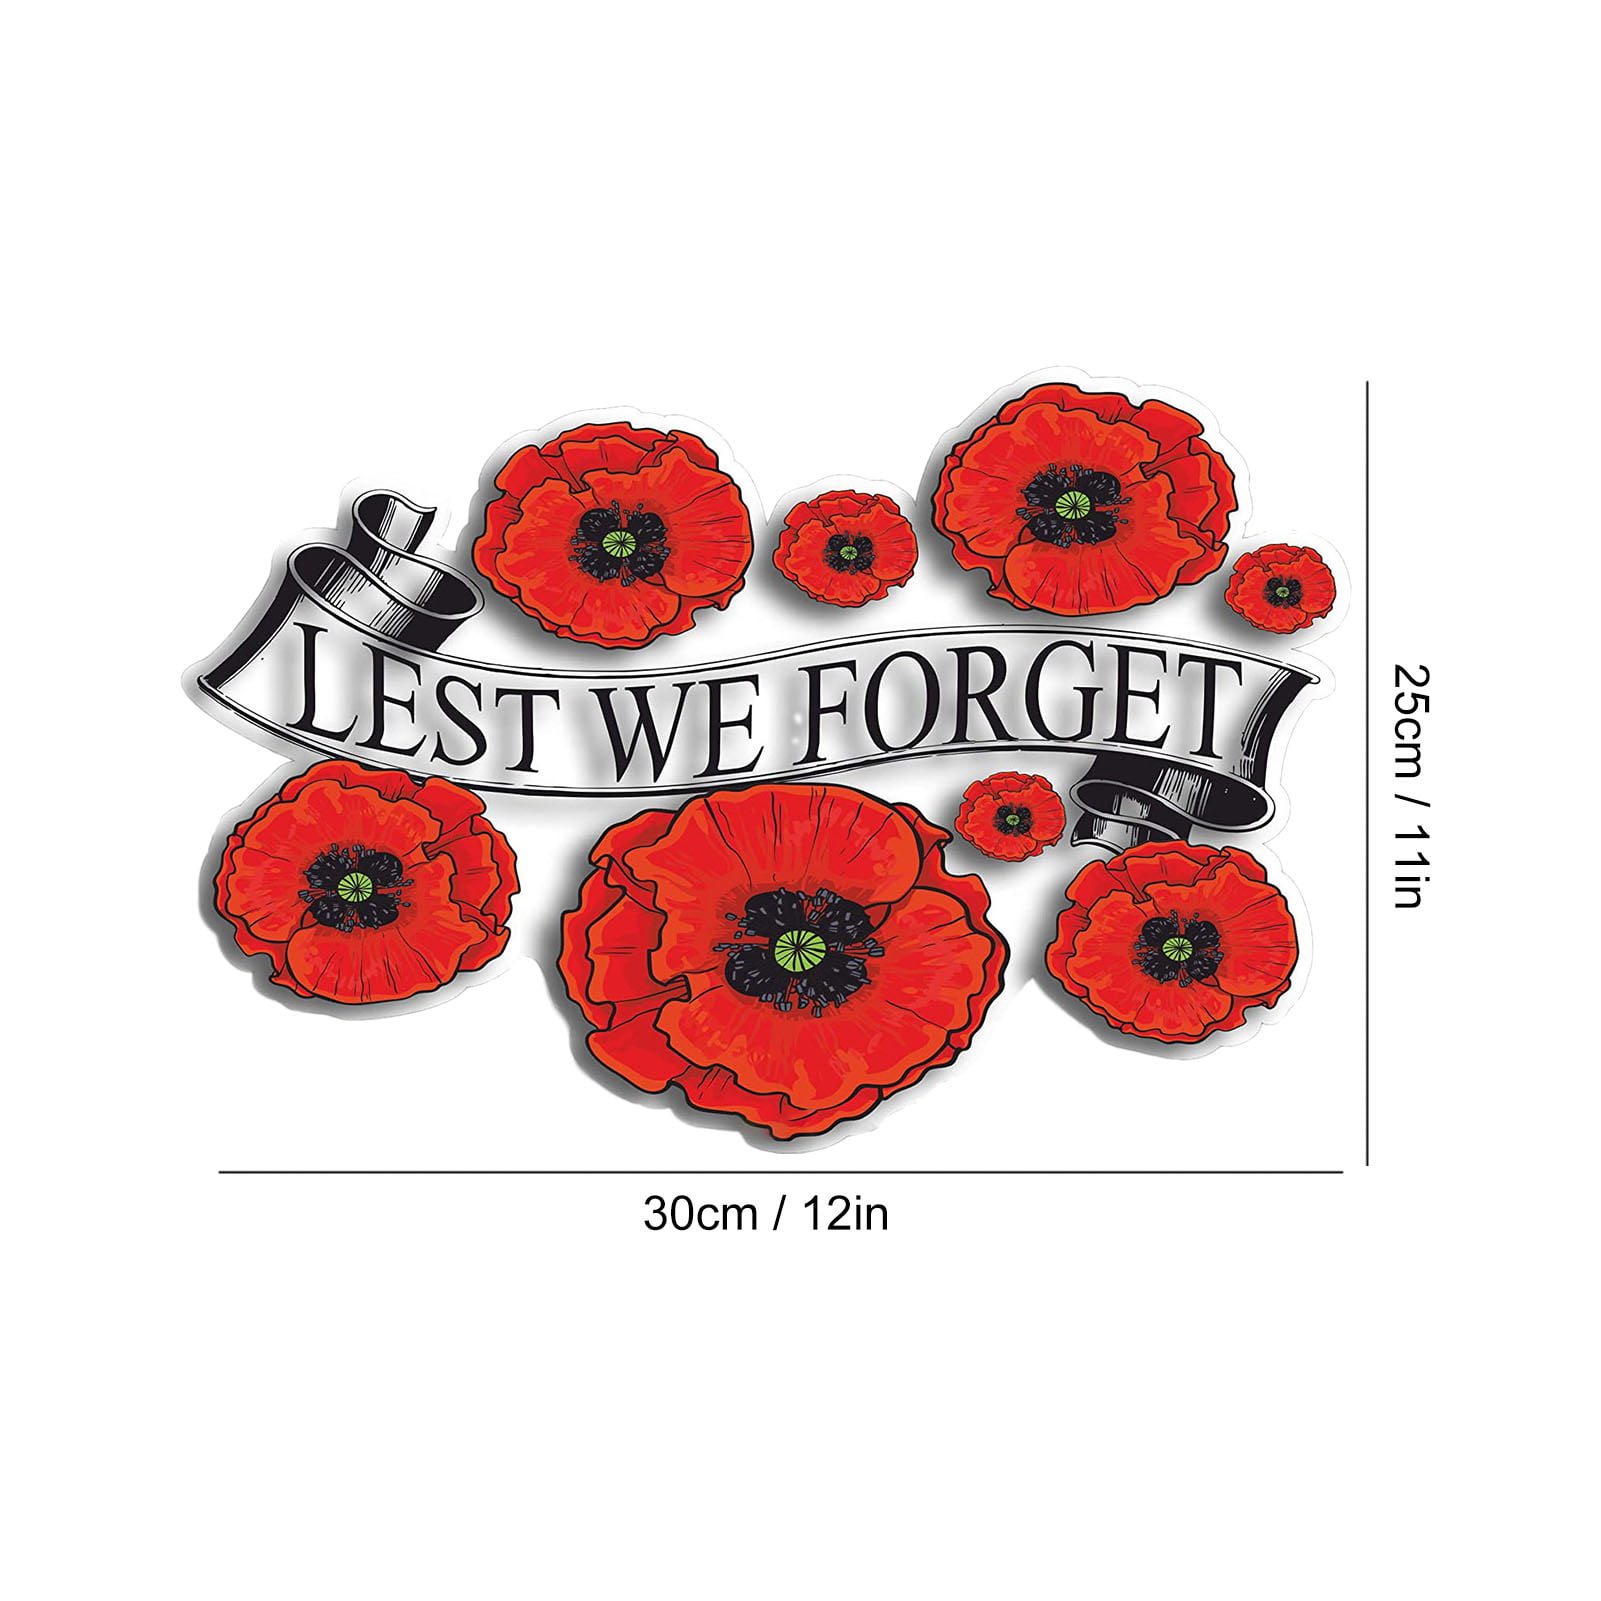 Vinyl Decal Sticker for Wine bottle lest we forget Poppy at the going down of 